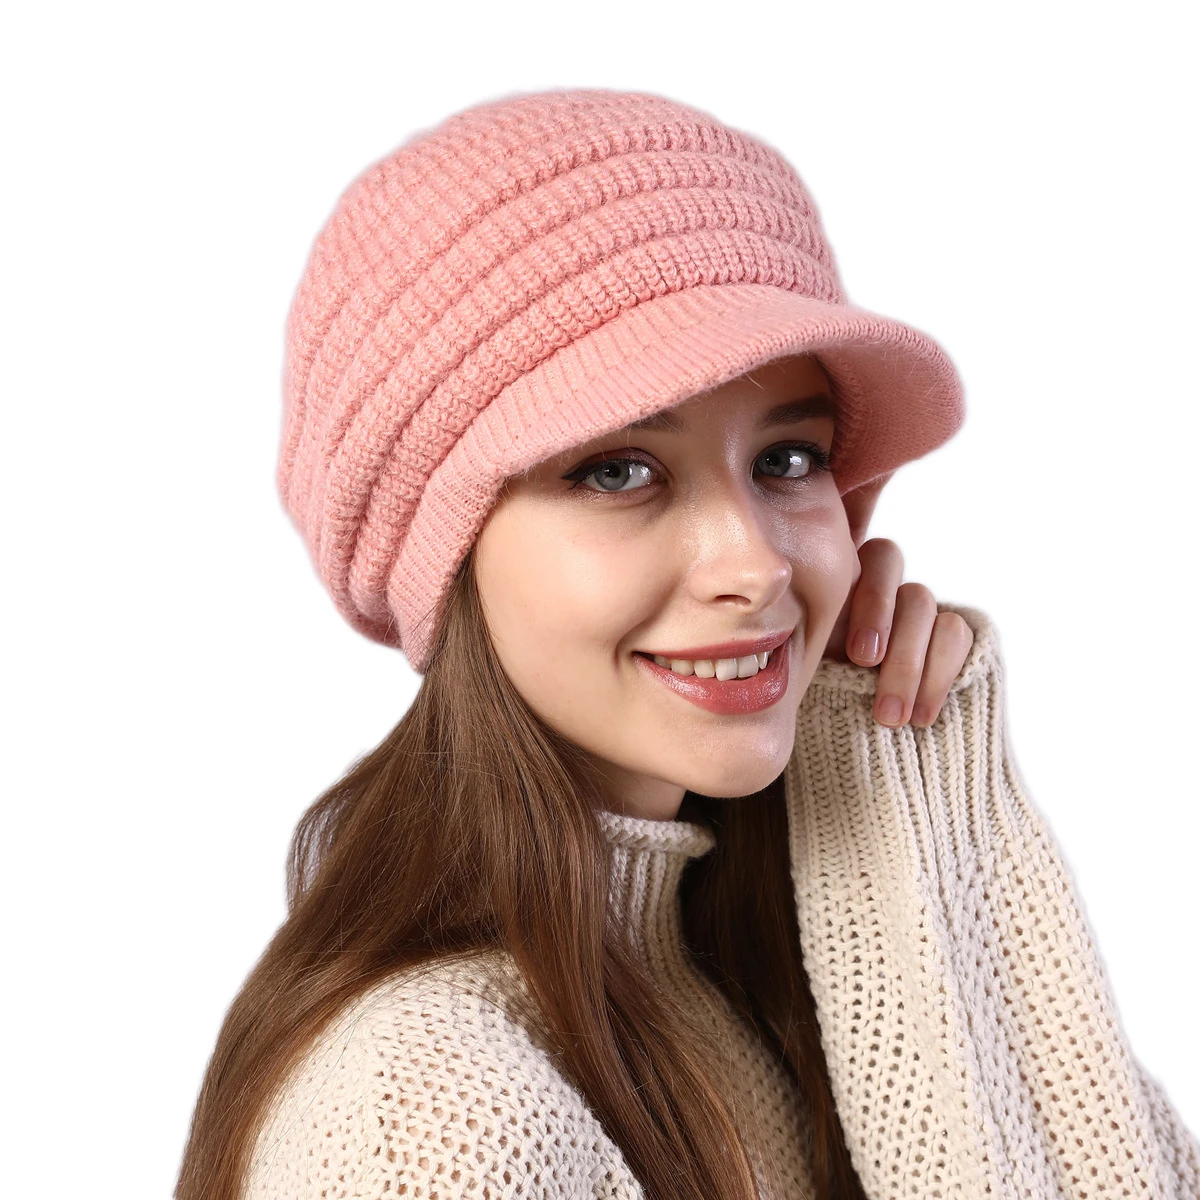 

Winter Warm Fleece Lined Slouchy Skull Beanie With Visor Knitted Newsboy Hats for Women Soft Cold Weather Hat With Brim